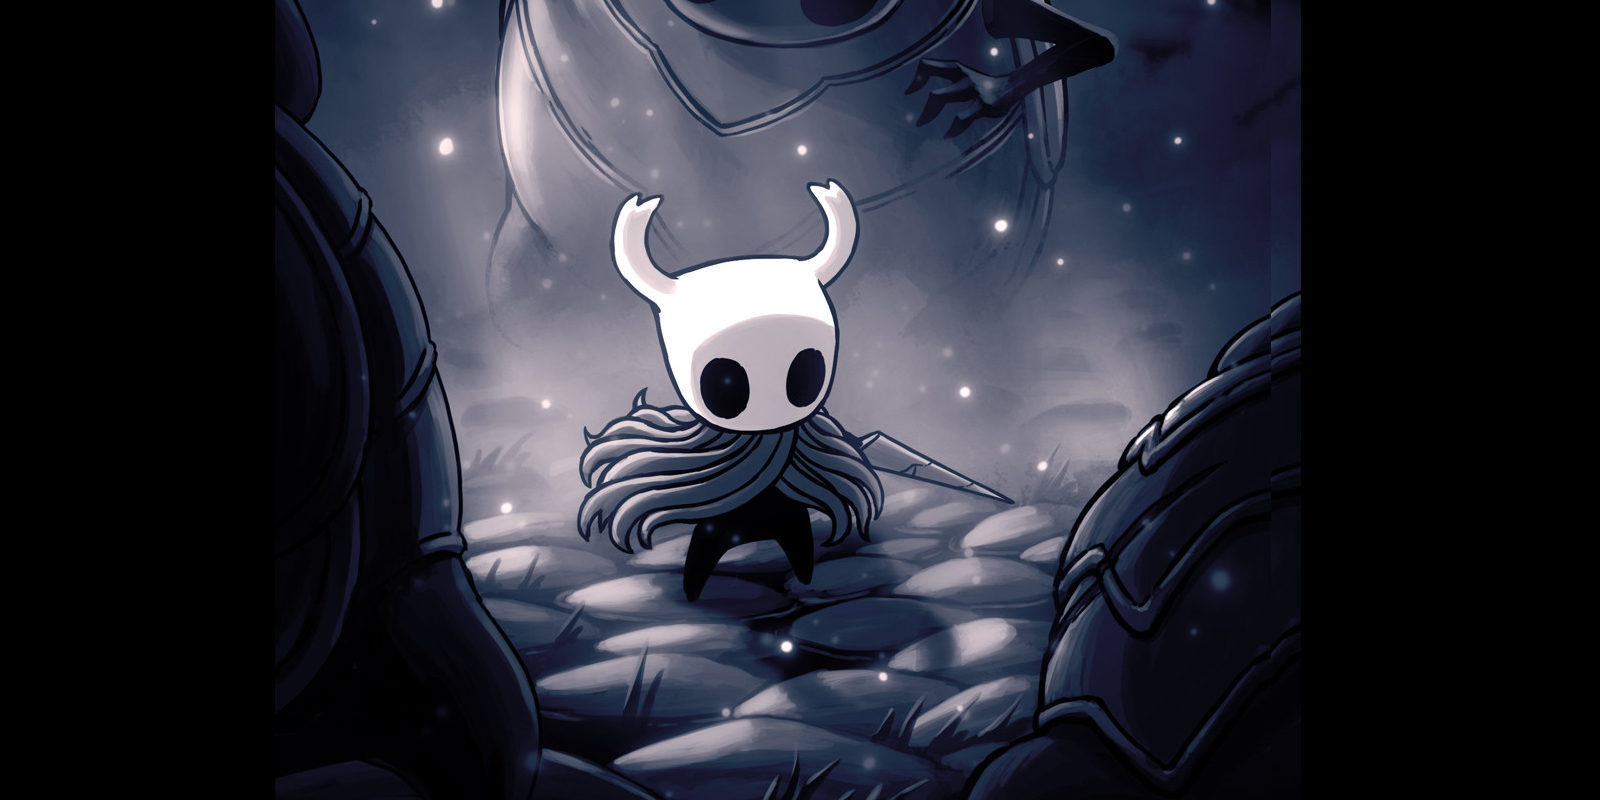 download hollow knight 2